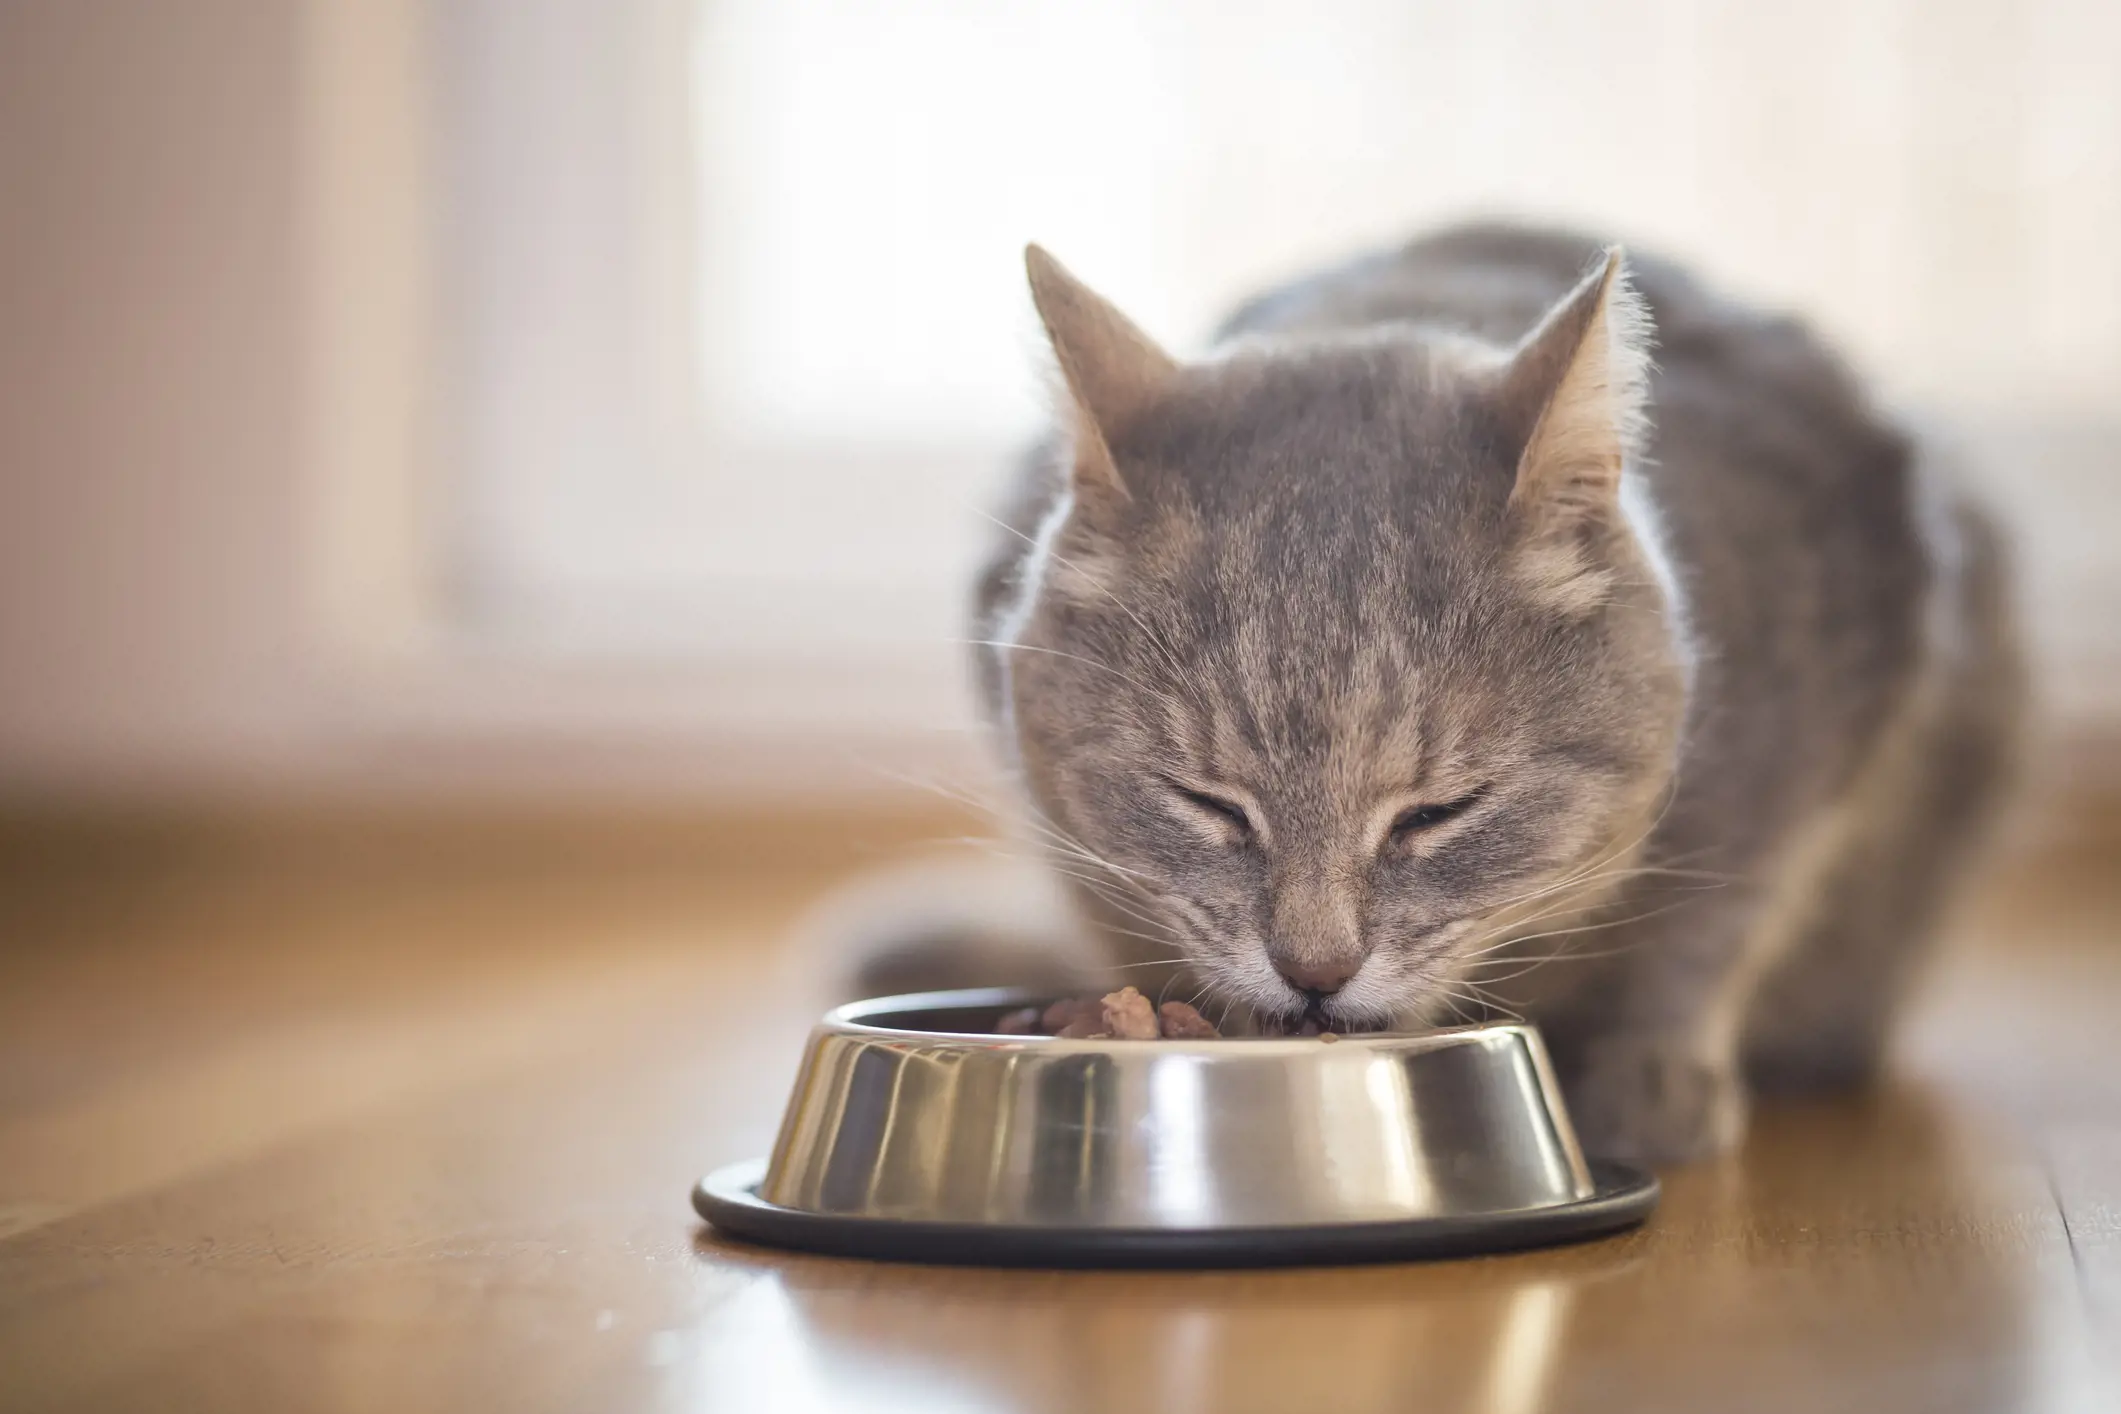 Researchers trial new calorie-rich food for cats with cancer